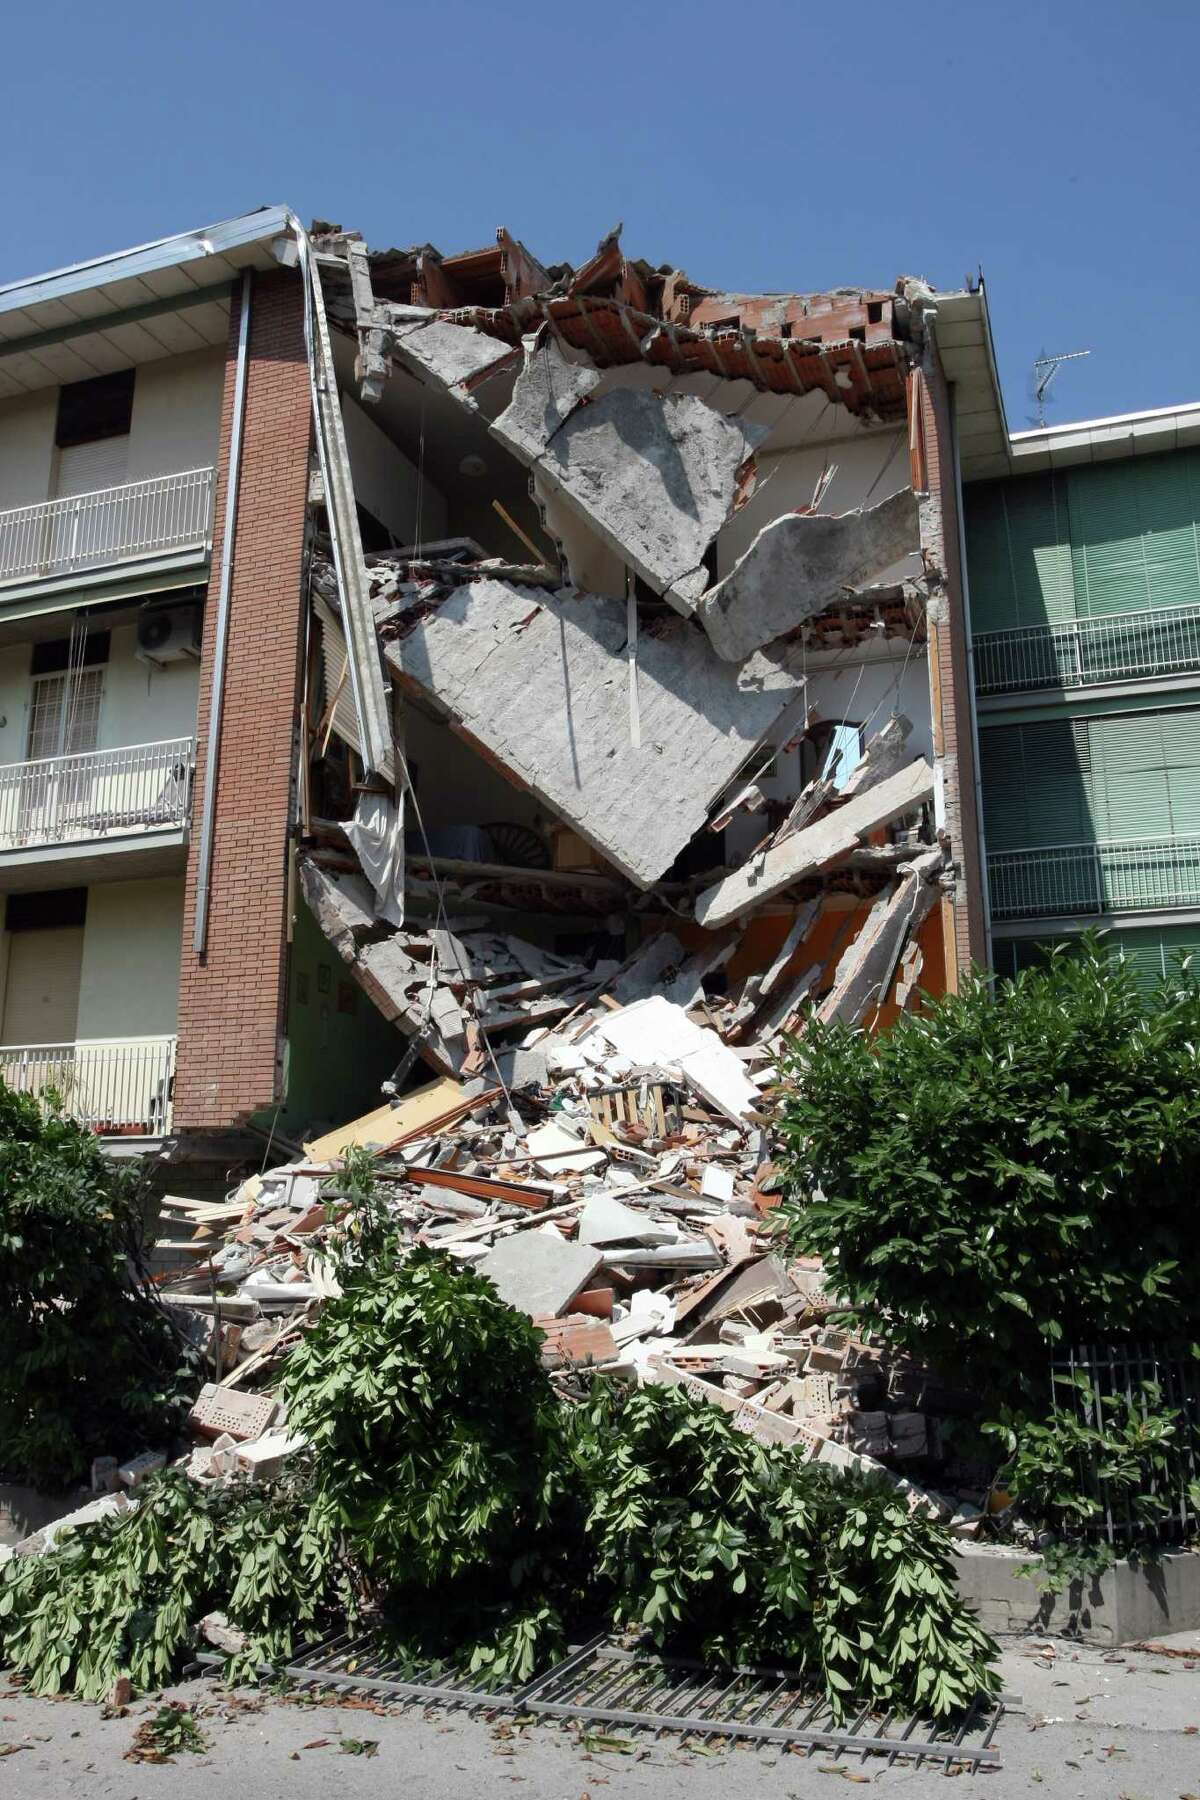 This picture shows a view of a building which collapsed after an earthquake on May 29, 2012 in Cavezzo. A strong earthquake rocked northeastern Italy Tuesday, killing at least 15 people, just days after another quake in the same region wrought death and destruction. AFP PHOTO / Pierre TeyssotPierre Teyssot/AFP/GettyImages